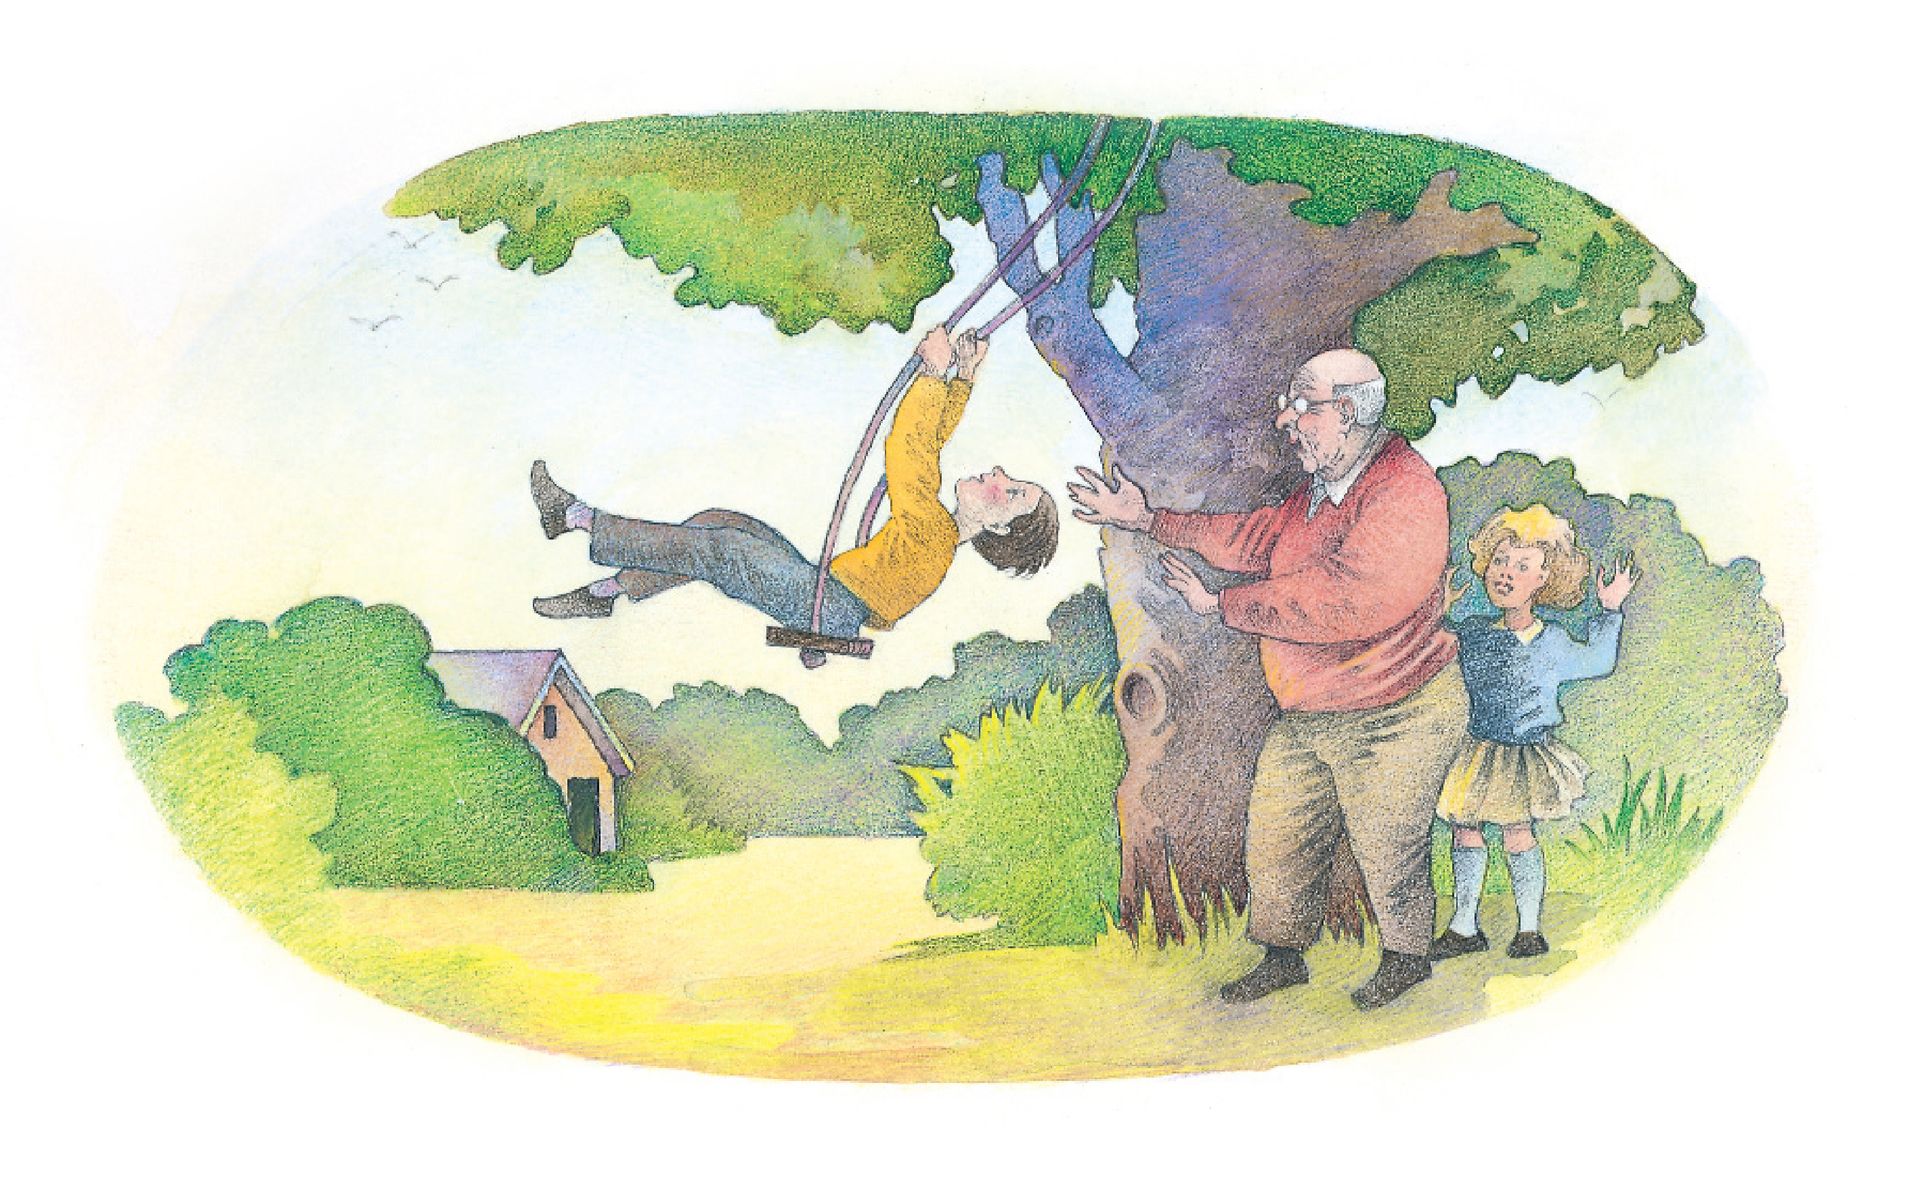 A grandfather pushing one of his grandchildren on a swing. From the Children’s Songbook, page 201, “When Grandpa Comes”; watercolor illustration by Richard Hull.